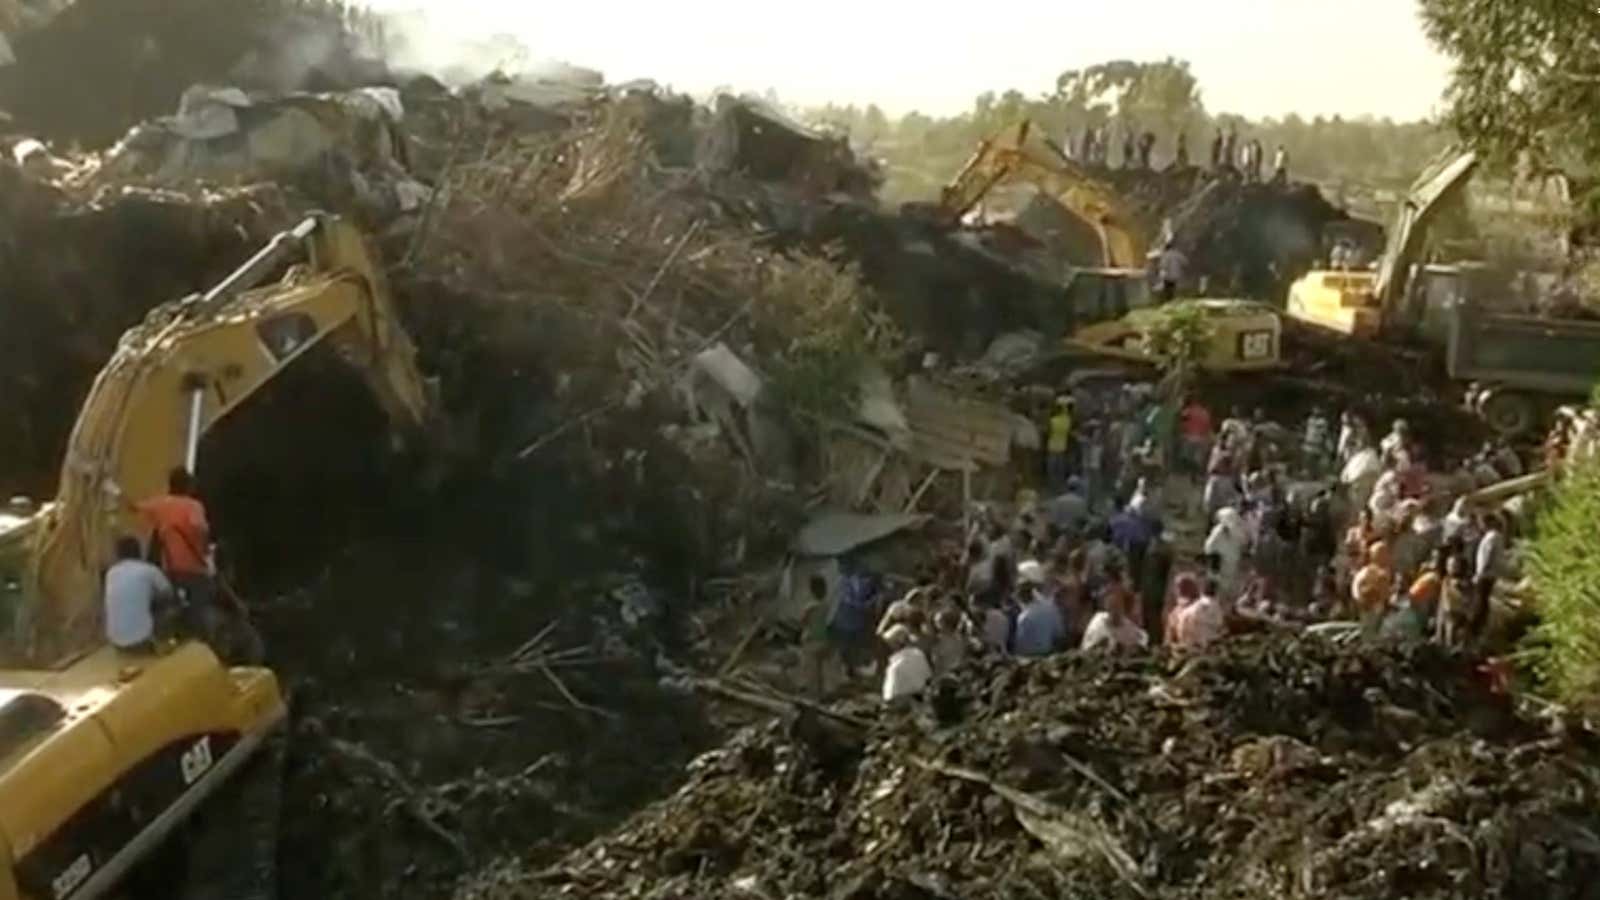 Excavators work a collapsed landfill on the outskirts of Addis Ababa.